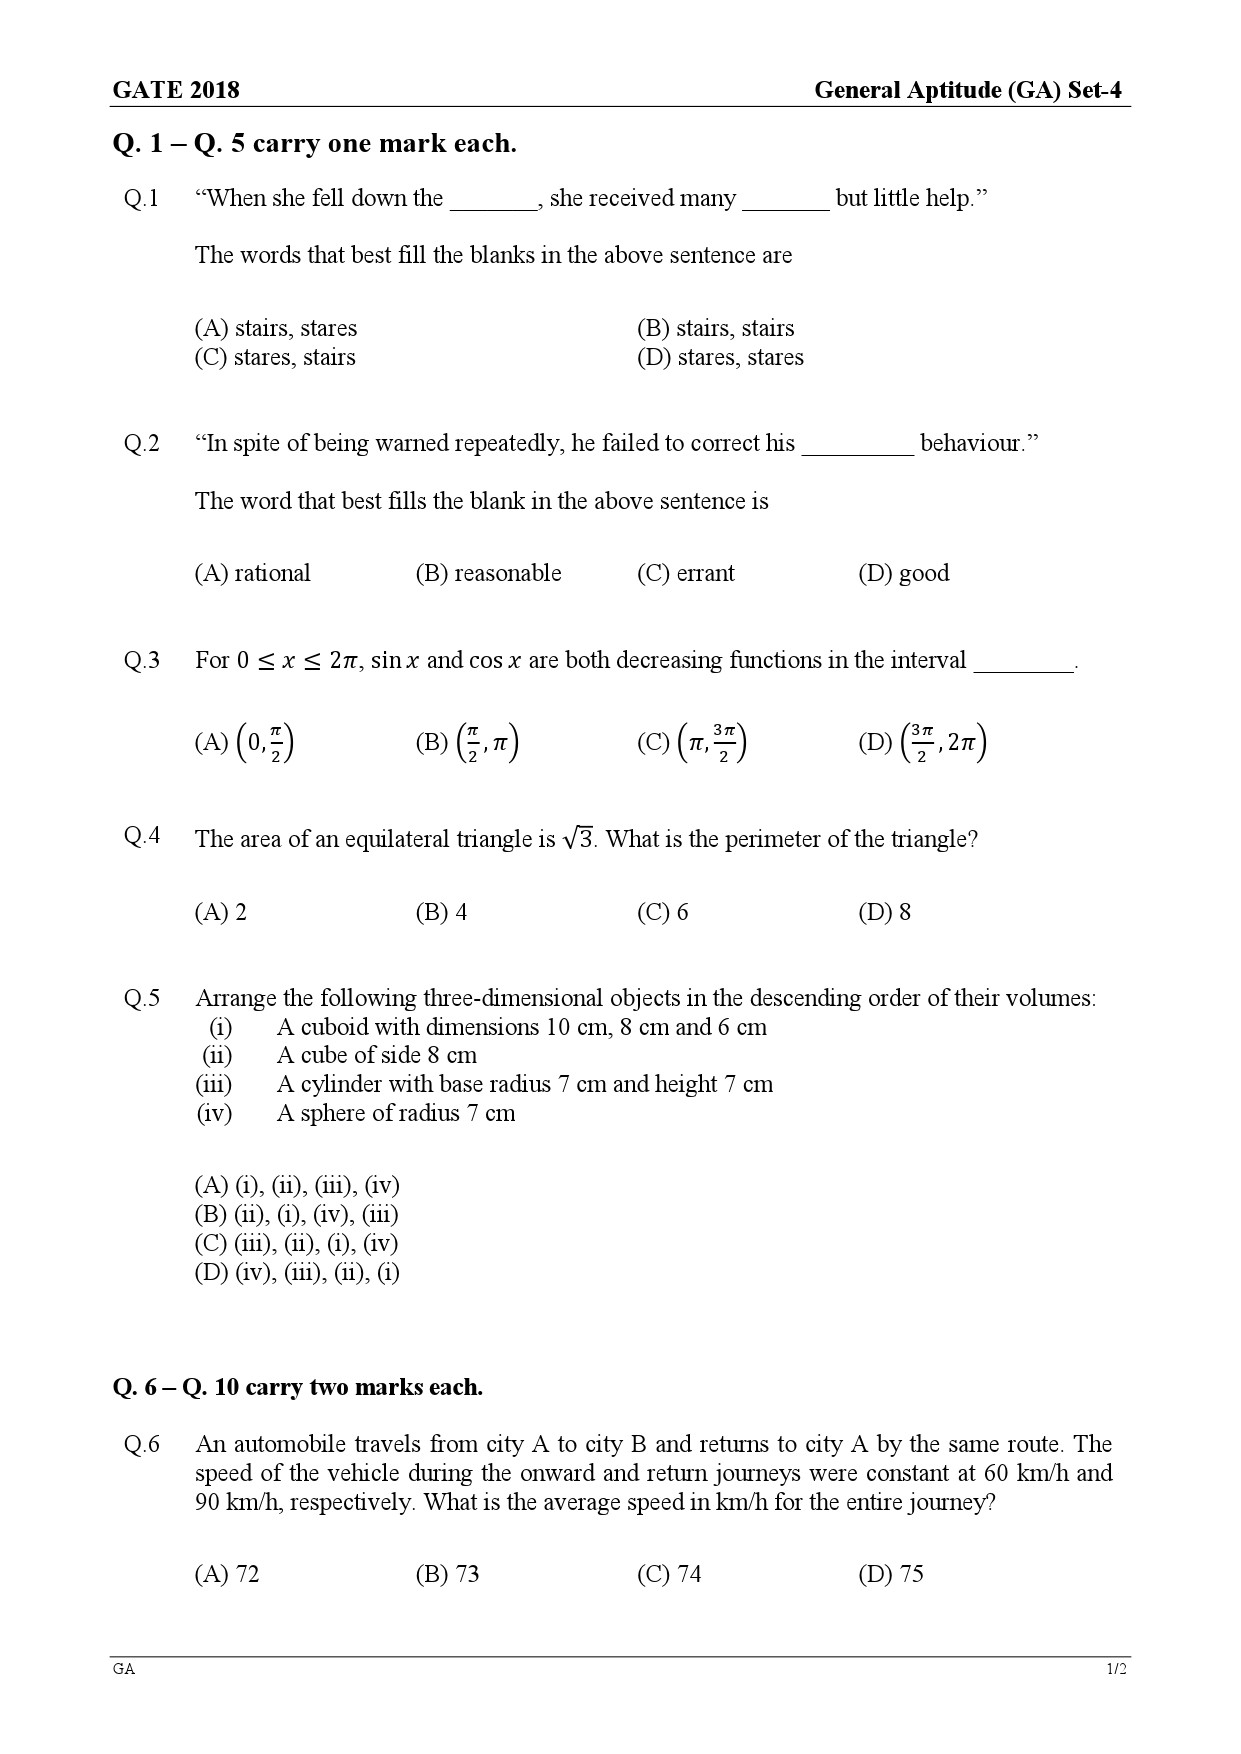 GATE Exam Question Paper 2018 Architecture and Planning 1